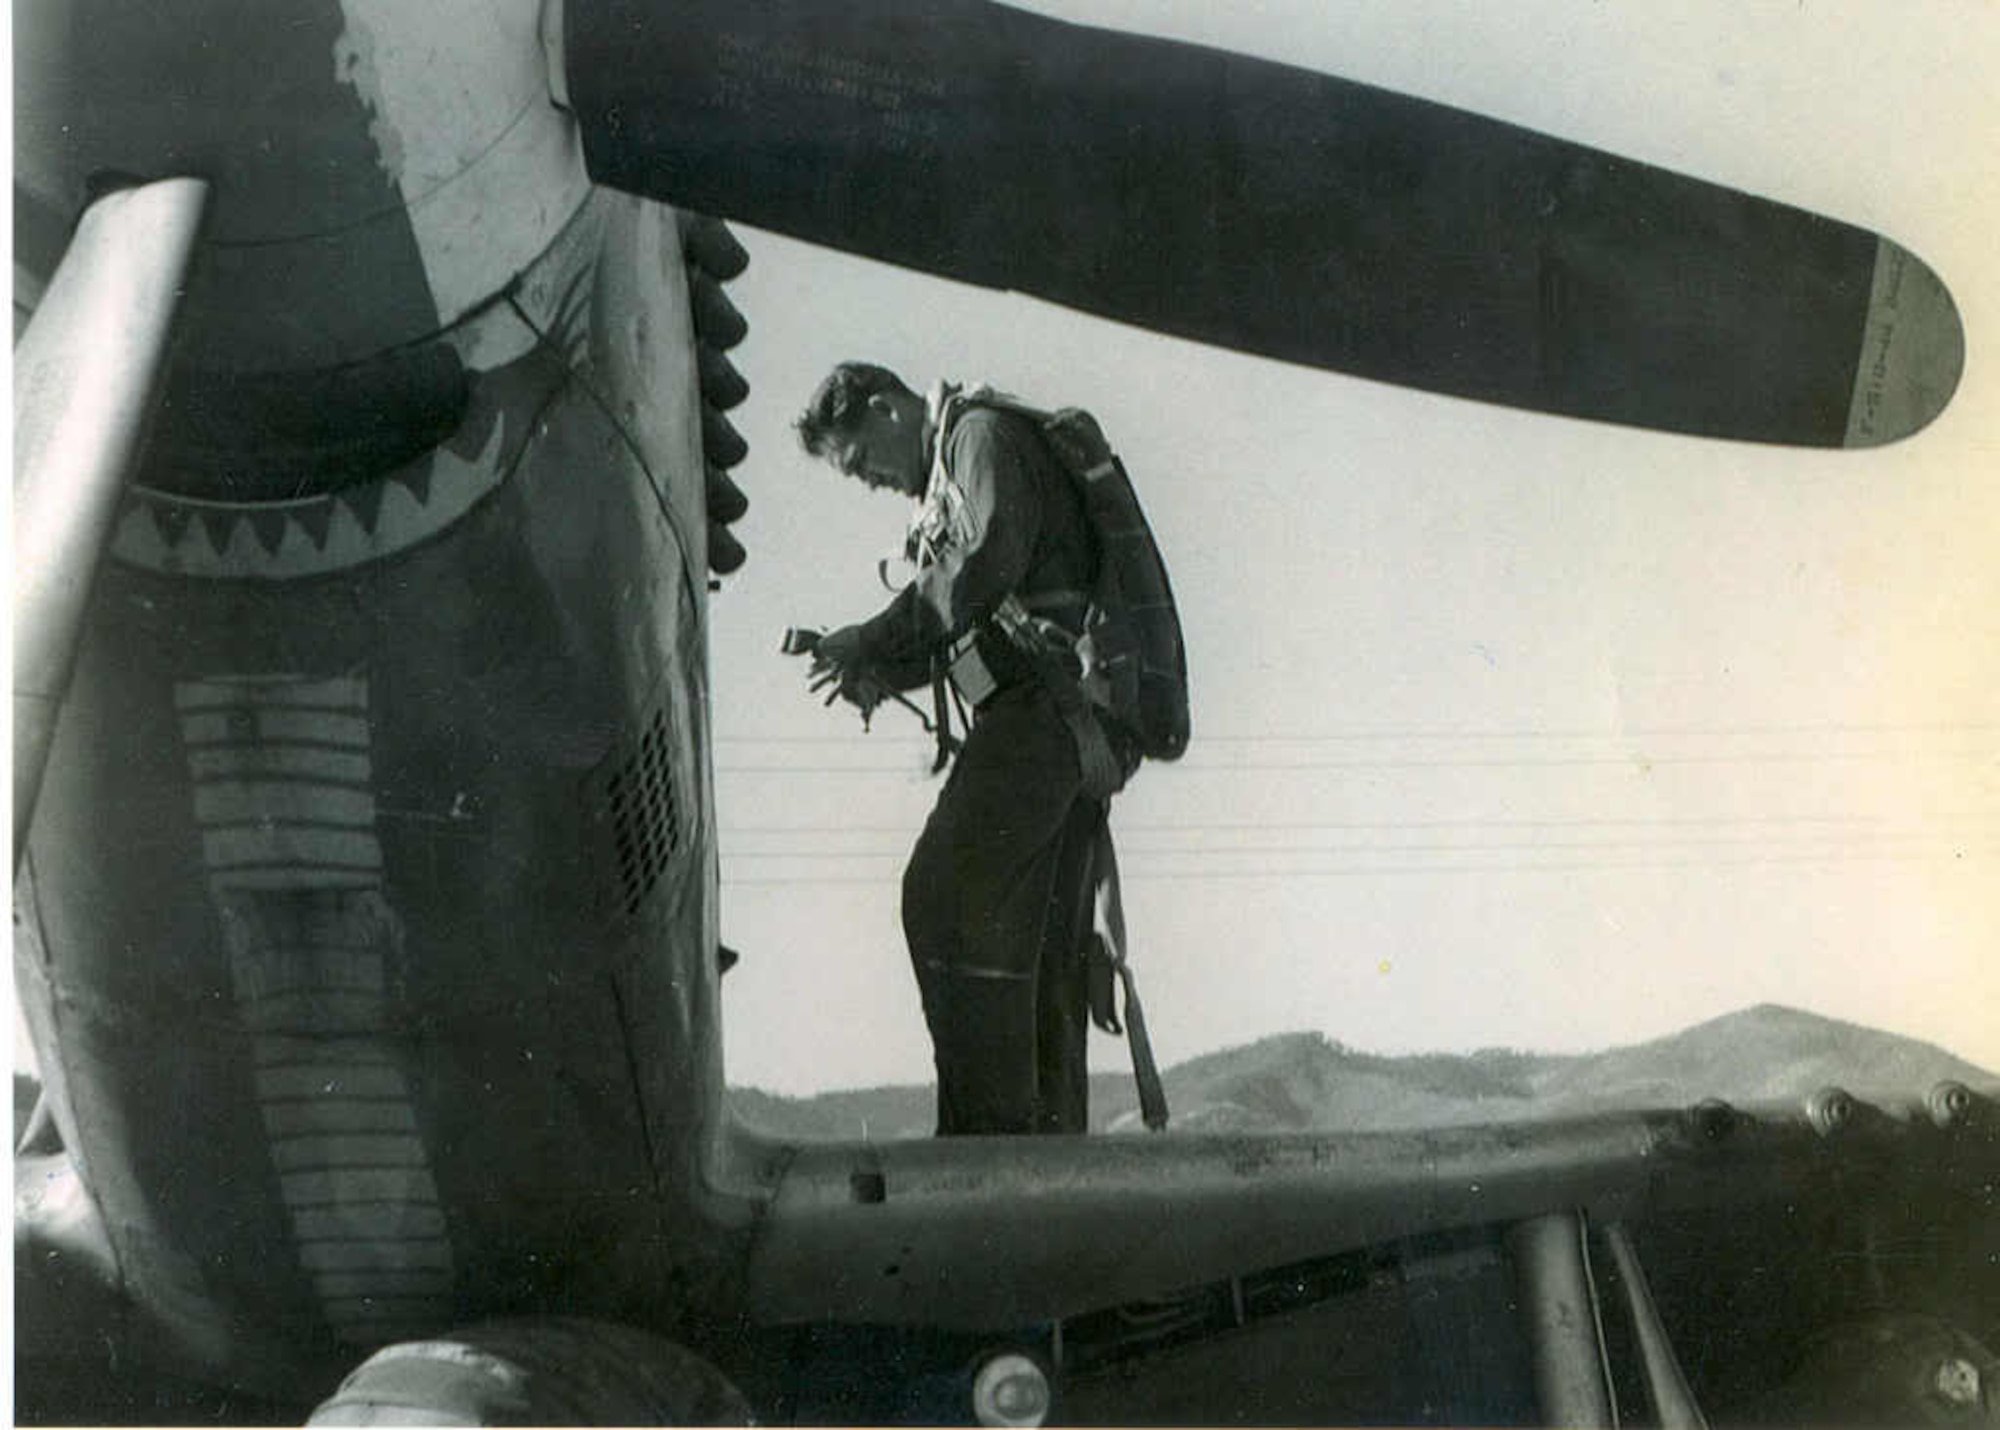 Oregon Air Guardsman Greg James prepares to embark on a combat mission in an F-51 Mustang fighter-bomber.  Note the “cobra” markings on the belly of his plane, indicating this was the aircraft of the fellow squadron member John “JET” Taylor.  An intense warrior and candidate for the ultimate fighter pilot, Taylor had a cobra, representing the 39th Fighter Interceptor Squadron, painted along the entire length of the bottom of the fuselage of his Mustang because he wanted the enemy to know who it was that killed him.  He later rose to the rank of major general and commanded the Texas ANG.